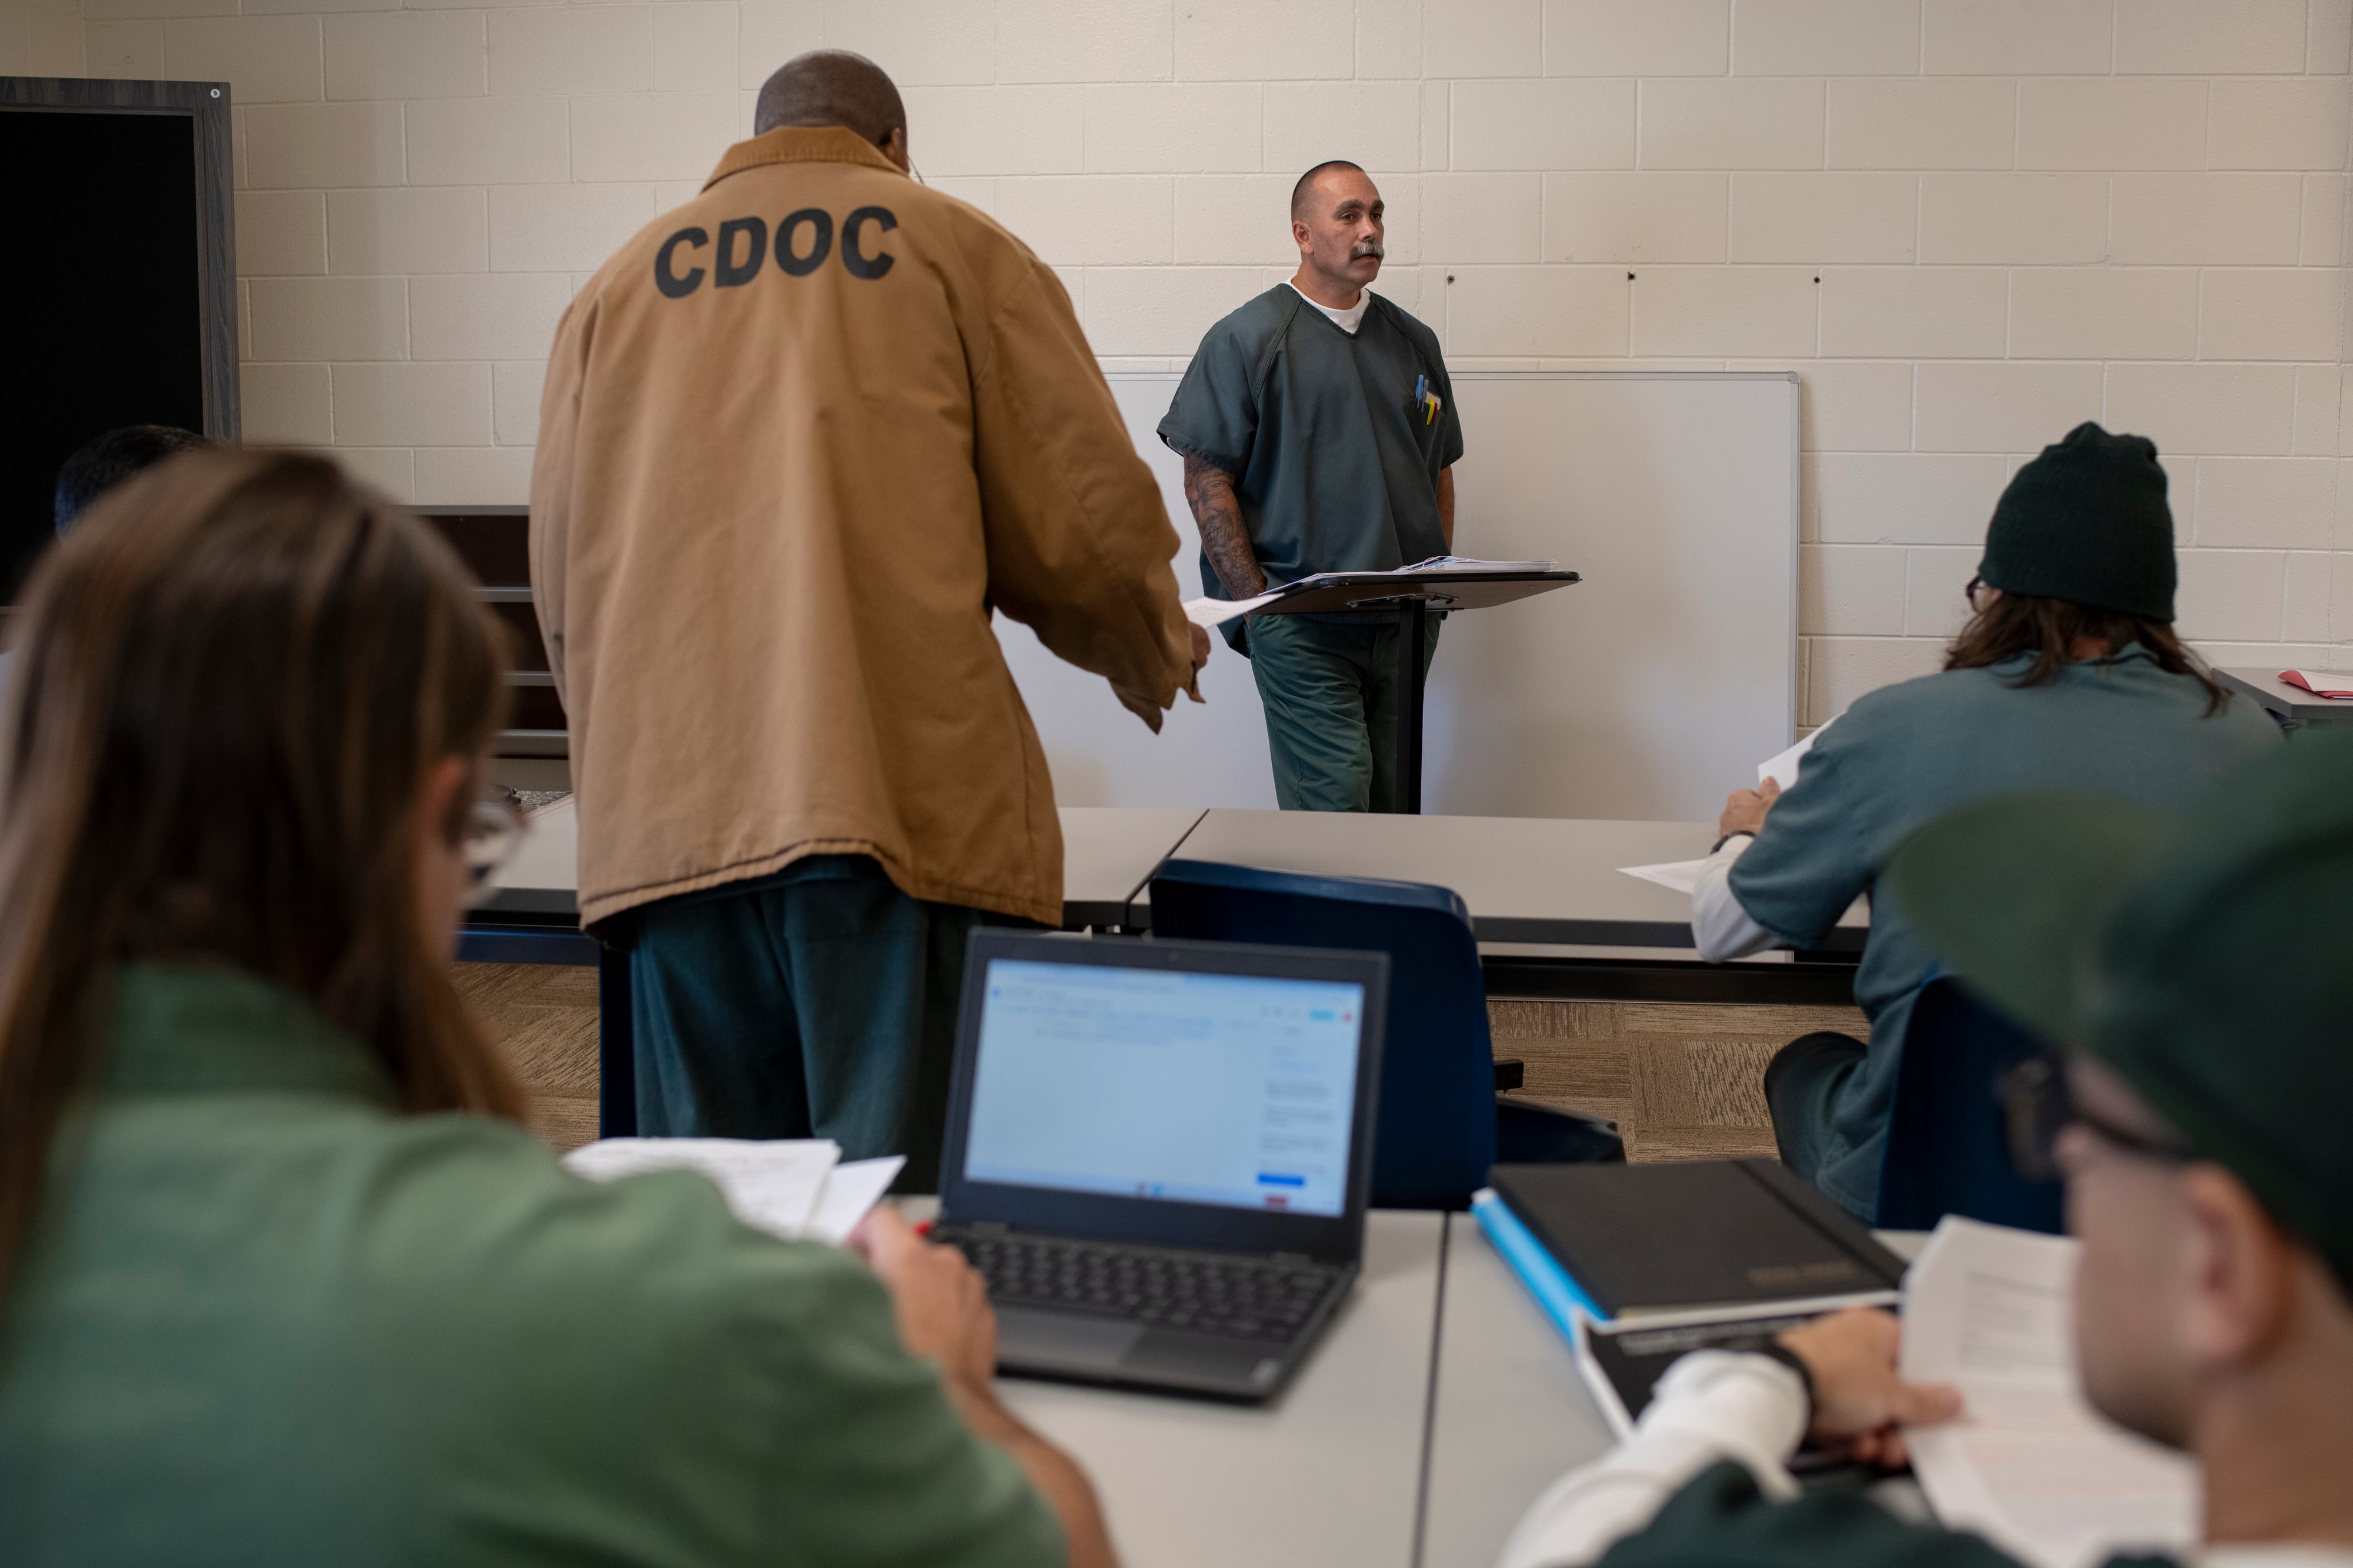 A man wearing a green jump suit stands at the front of a class with several others sitting at desks and one person standing with a tan jacket that reads "CDOC". A white brick wall in the background.